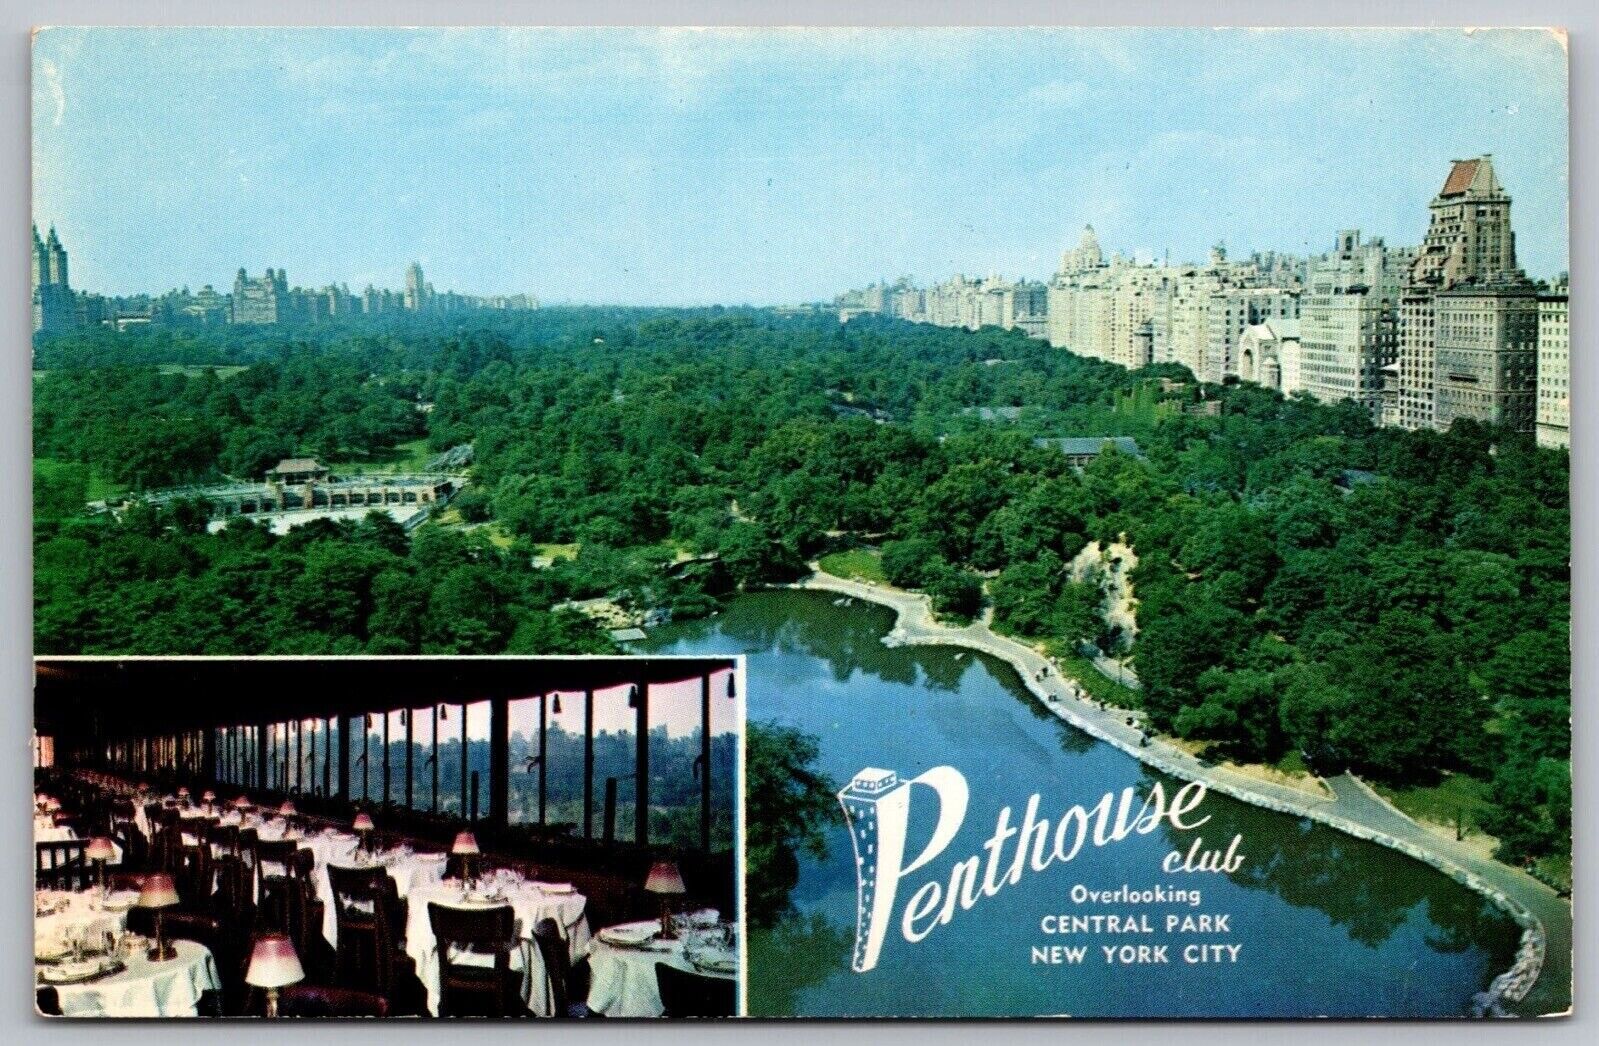 Penthouse Club Overlooking Central Park New York City NY Dual View Postcard WOB